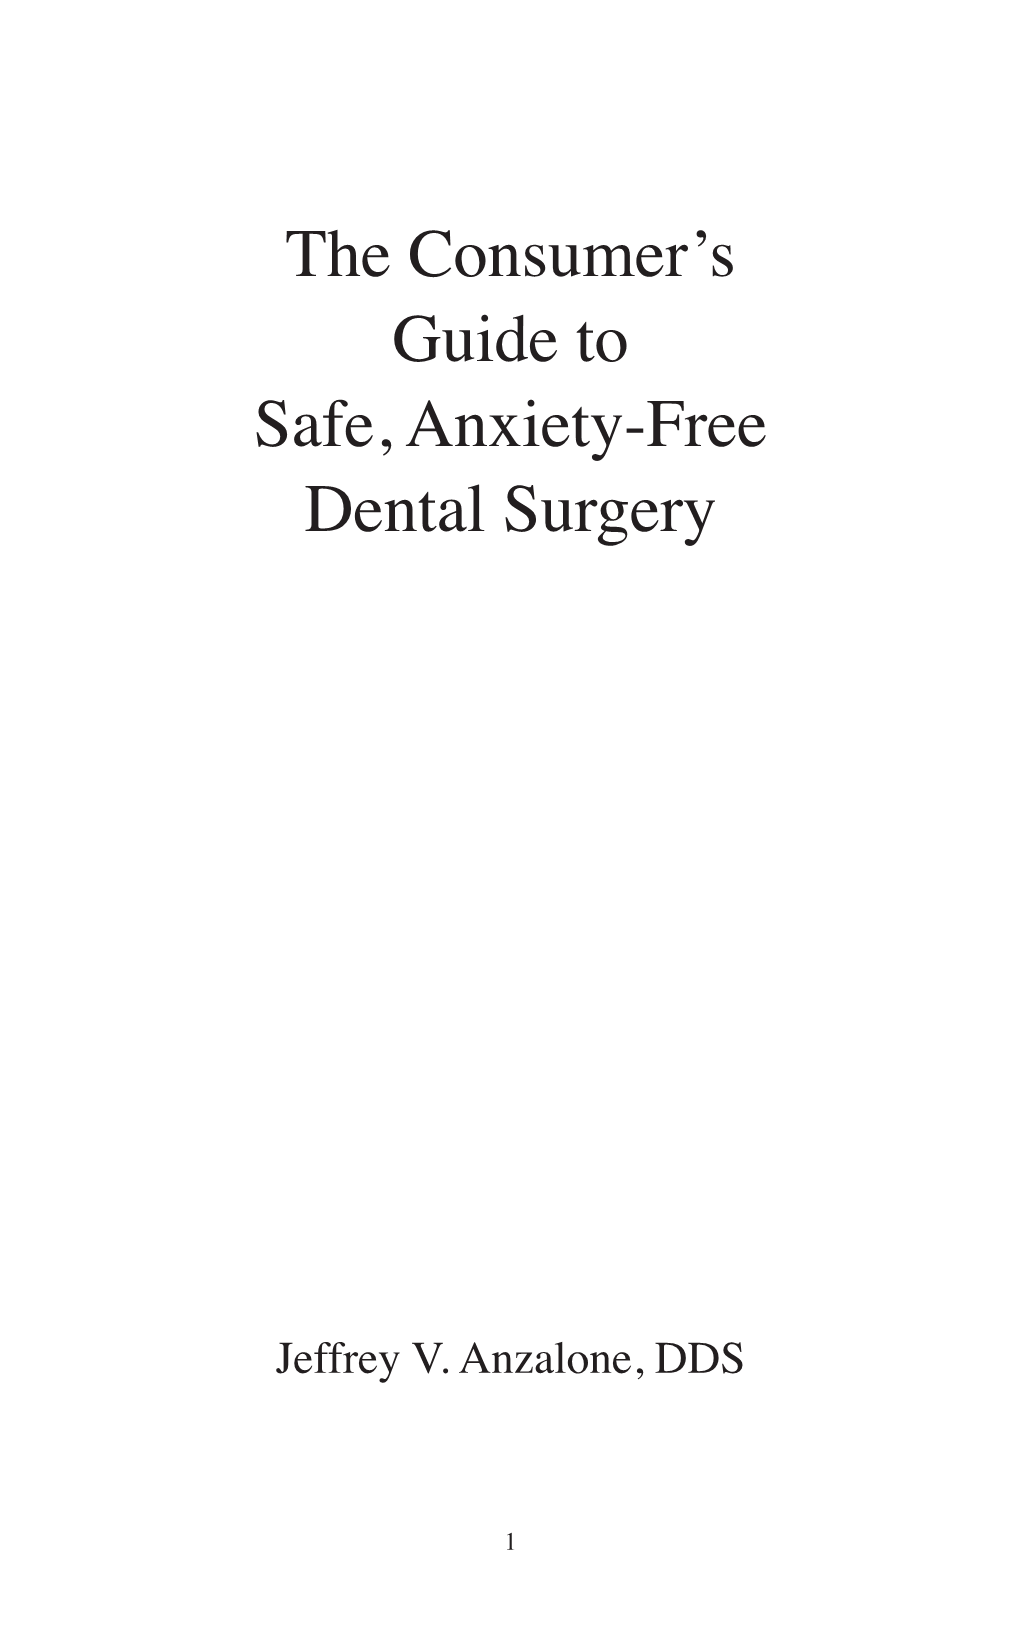 The Consumer's Guide to Safe, Anxiety-Free Dental Surgery